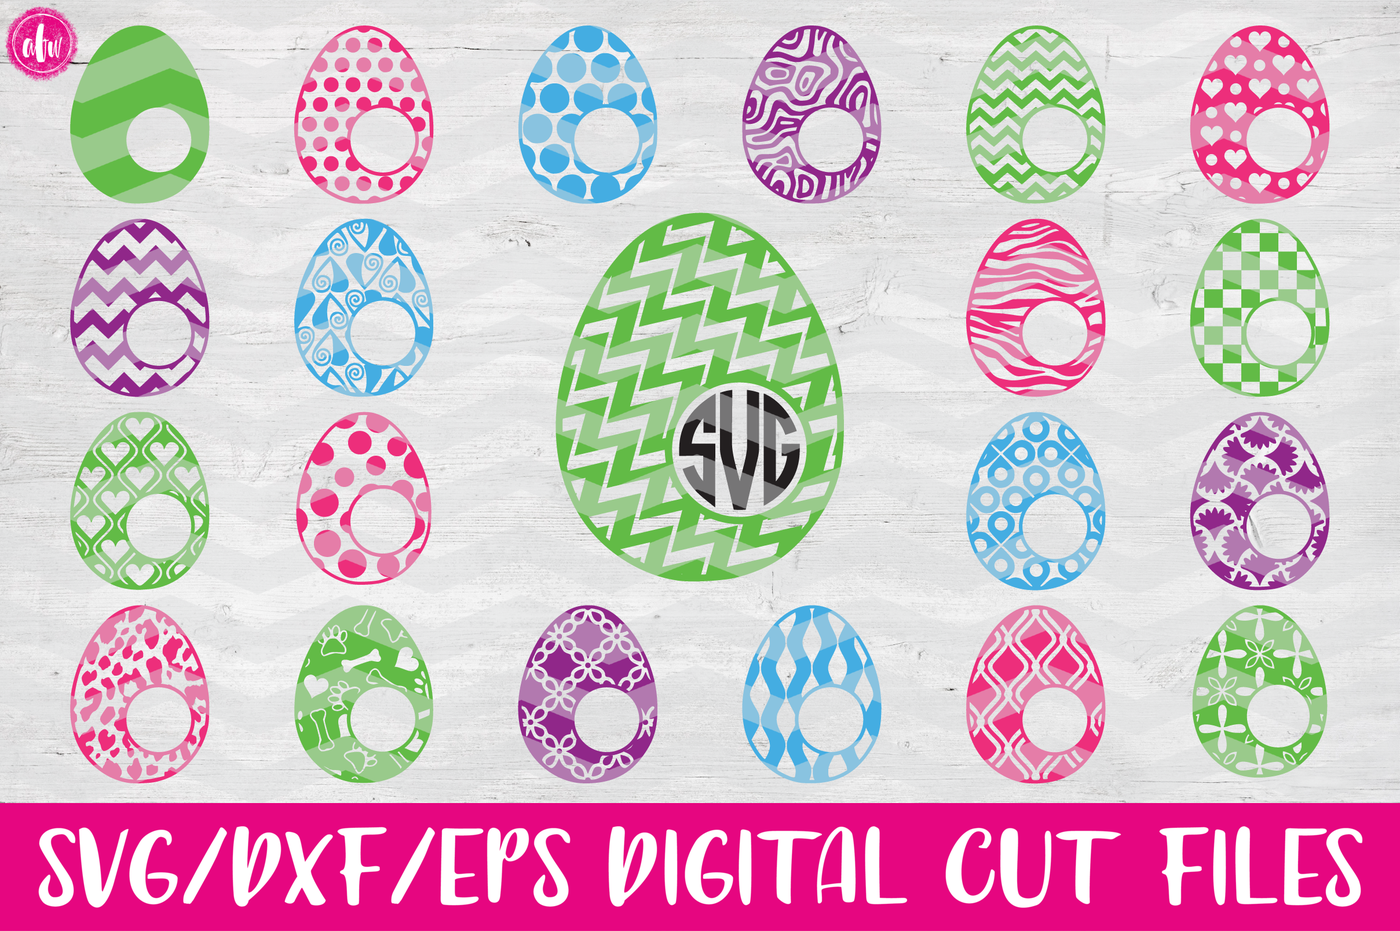 Download 40 Patterned Monogram Eggs Bundle - SVG, DXF, EPS Cut Files By AFW Designs | TheHungryJPEG.com